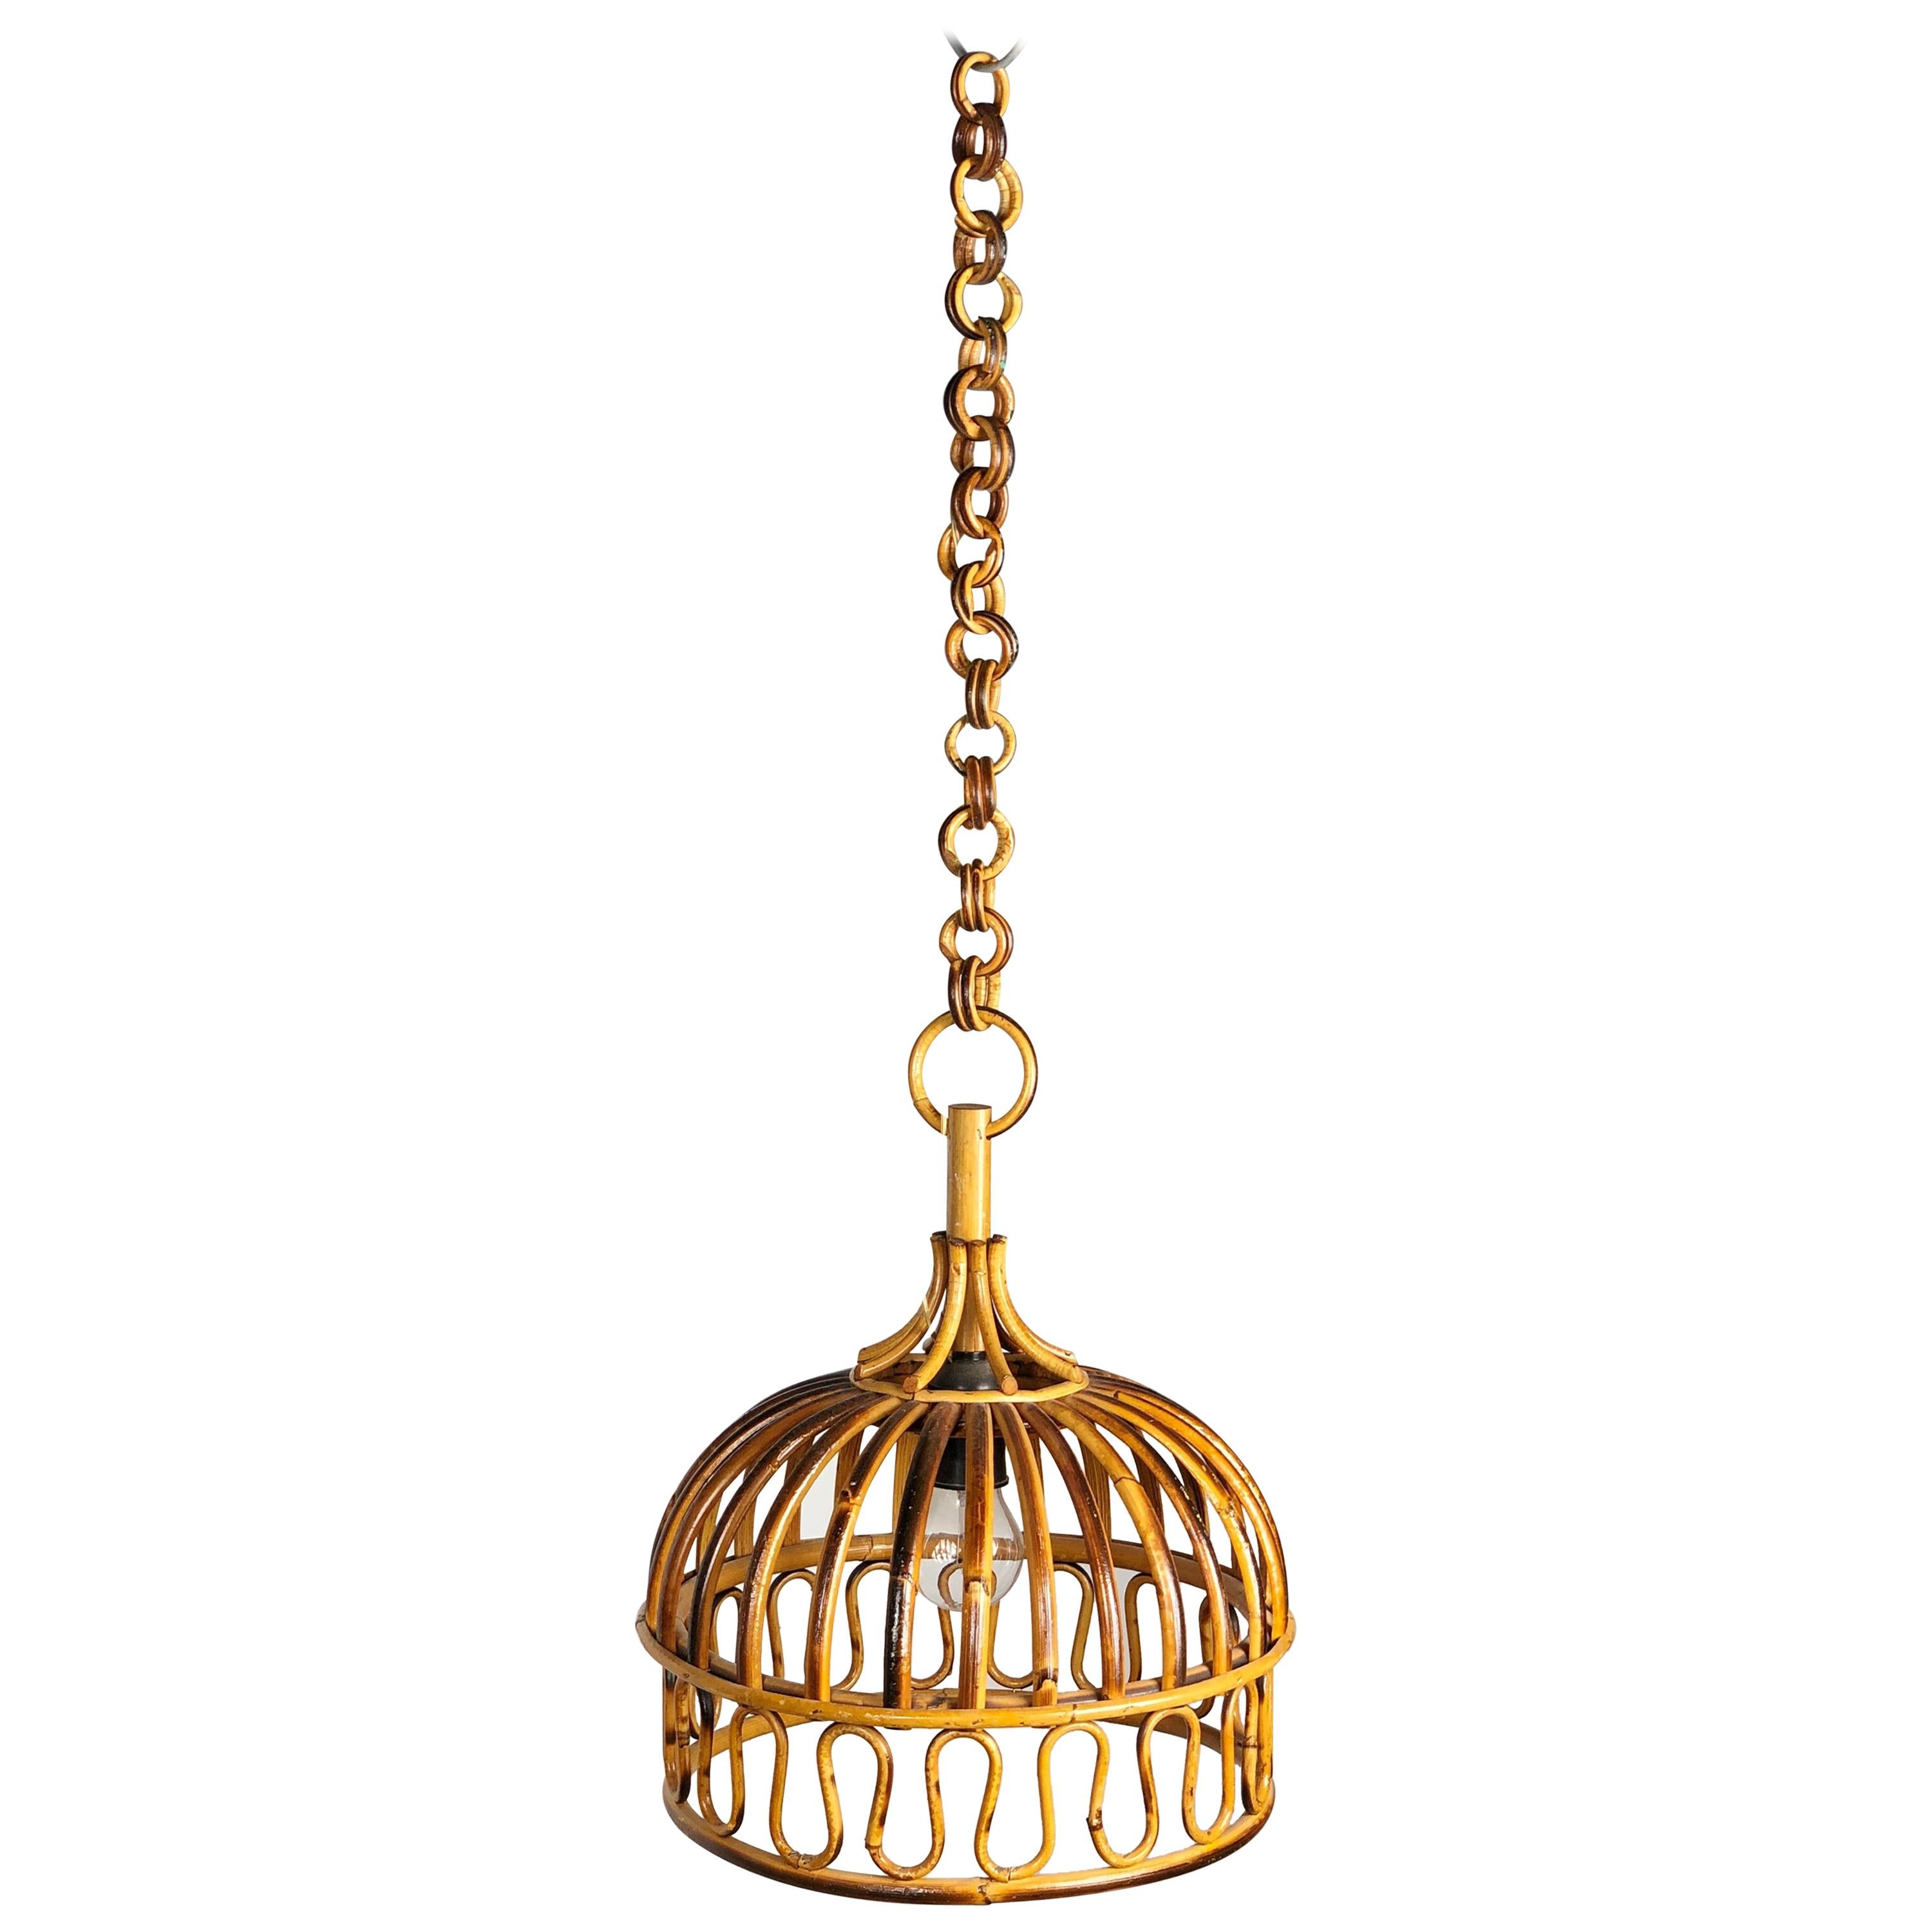 Franco Albini, Rattan Bell Shaped Pendant, French Riviera Style, Italy, 1960s